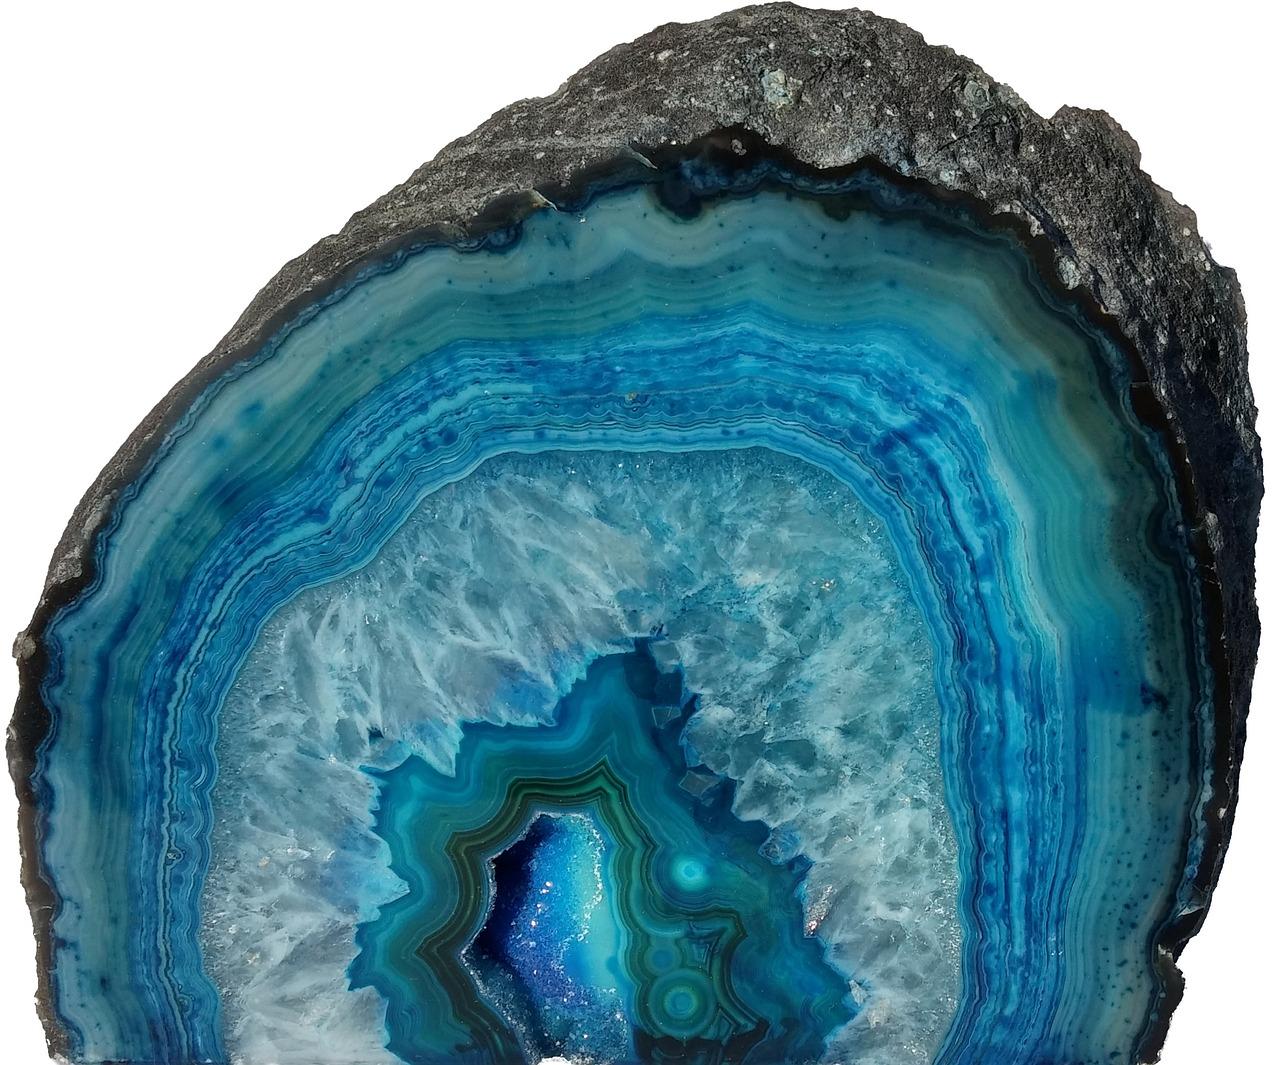  How Much Is A Geode Rock Worth 